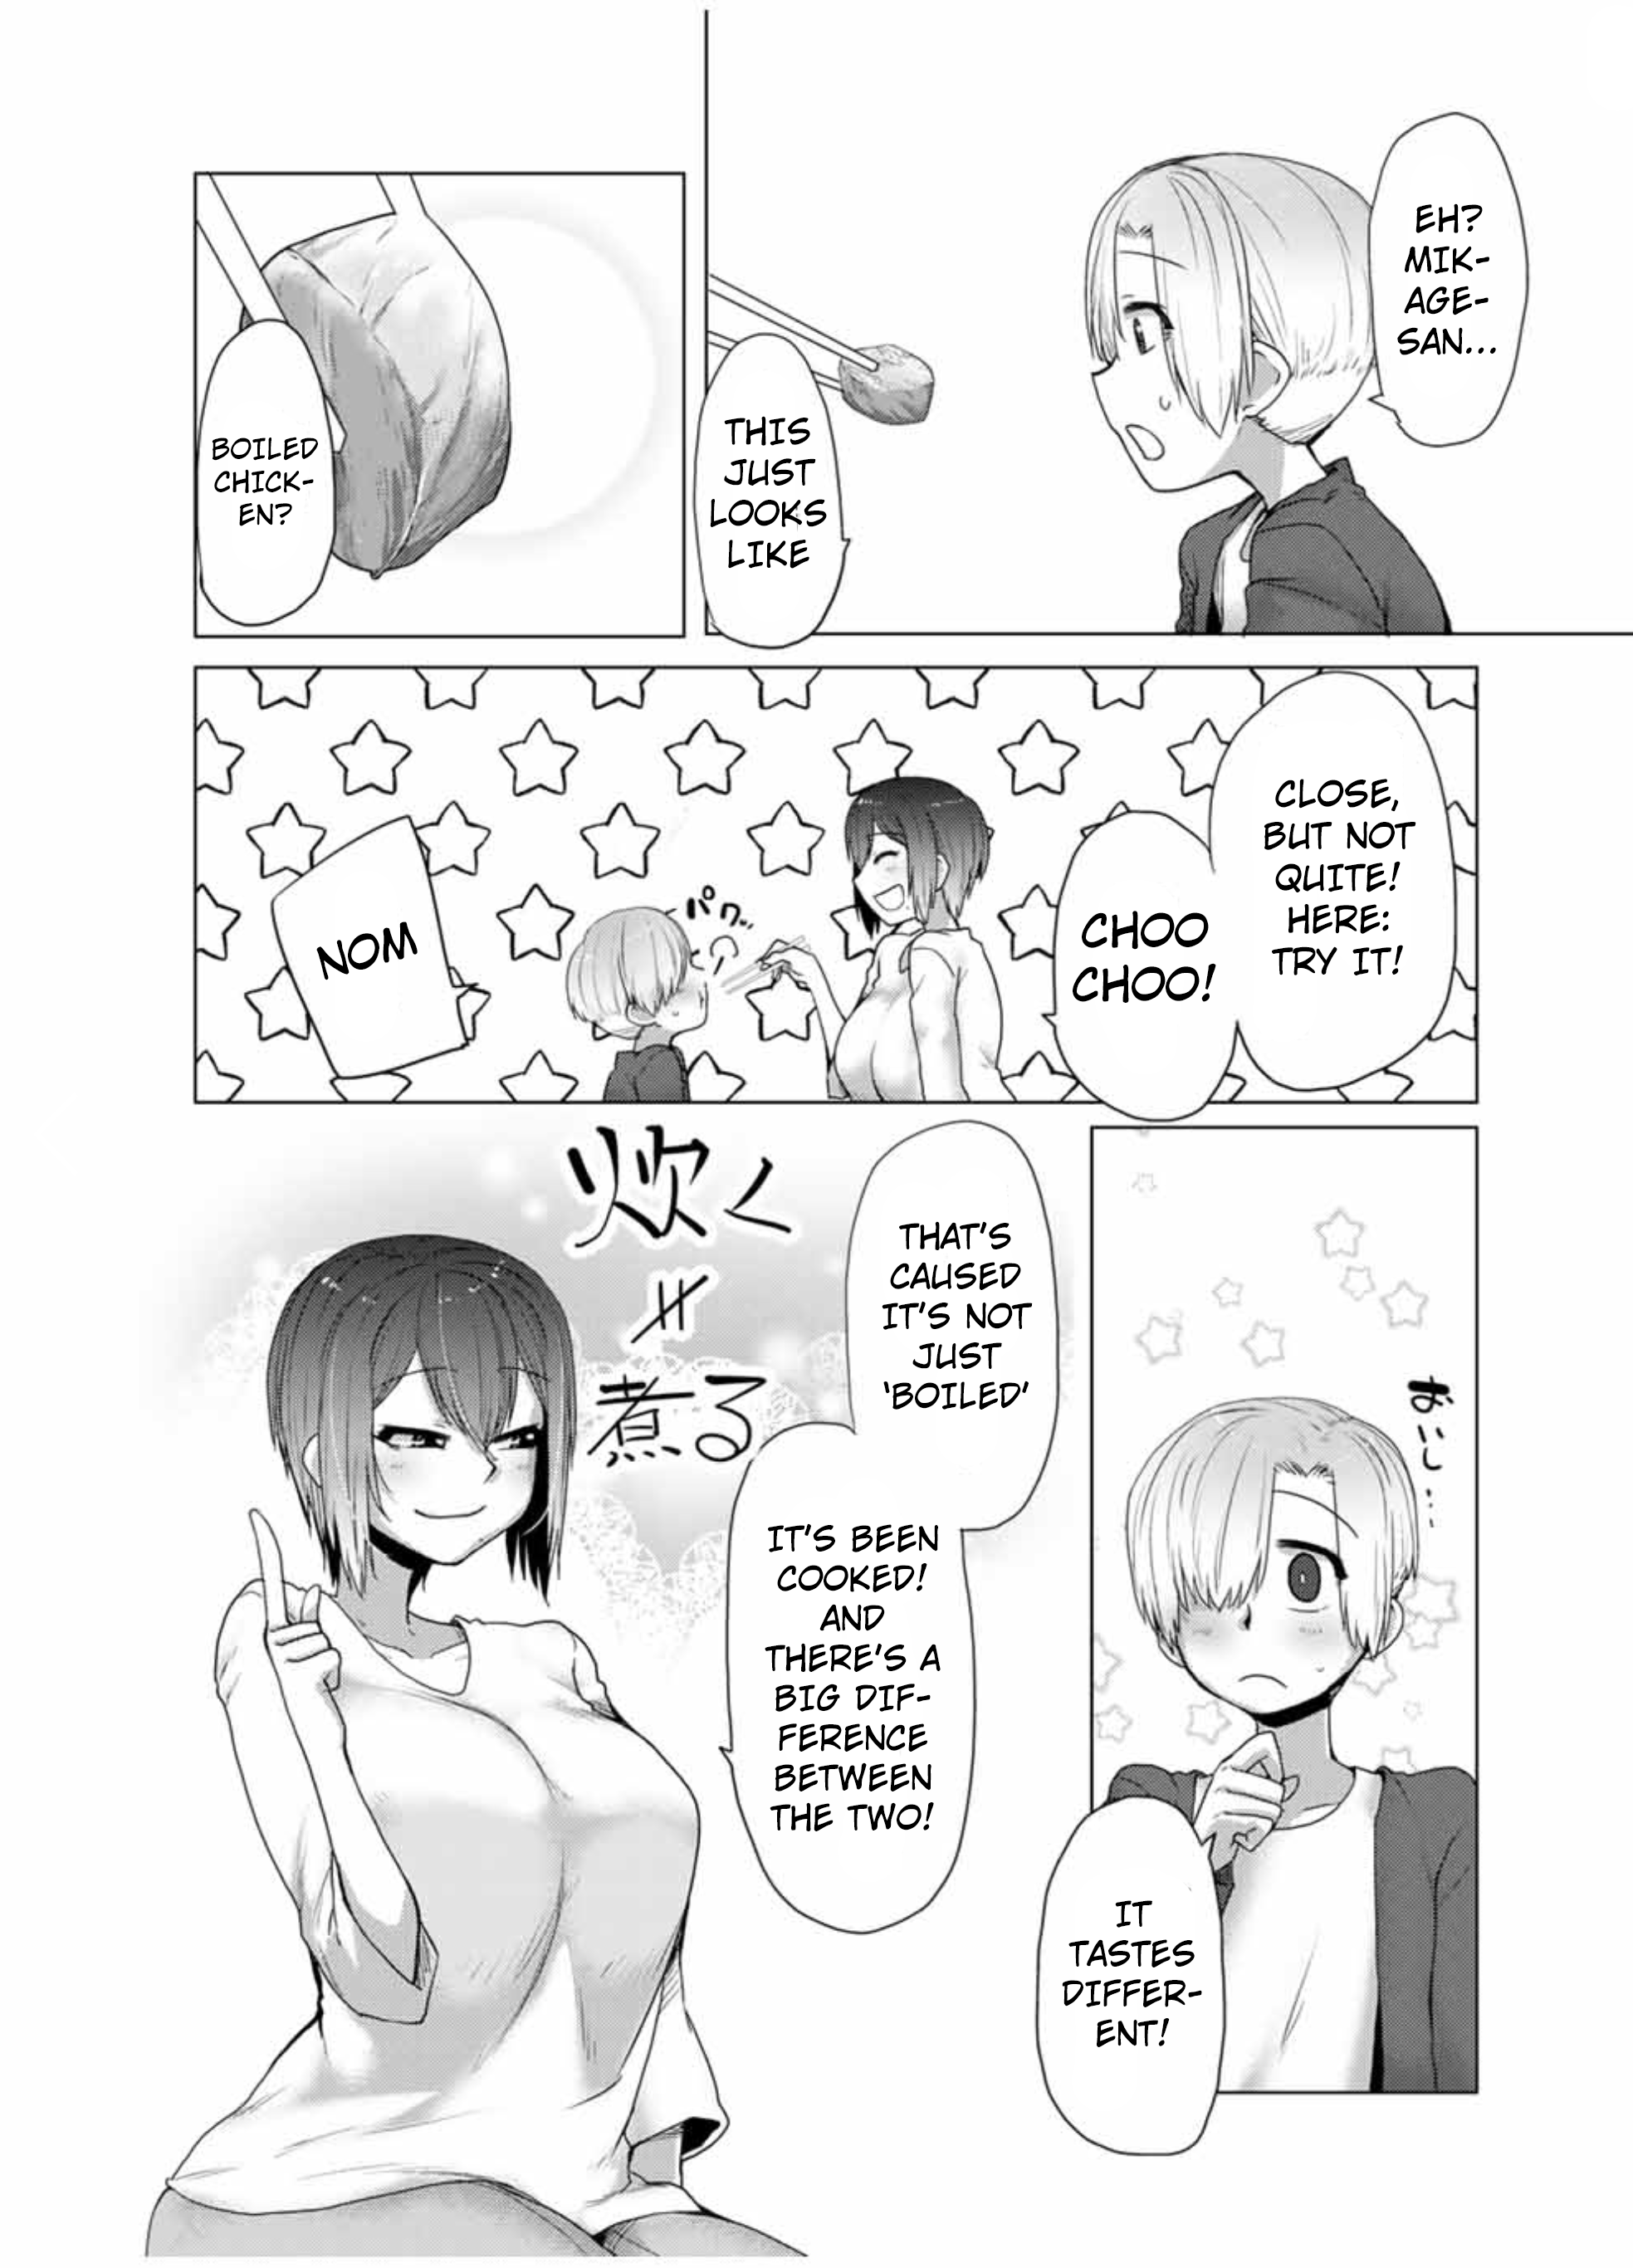 The Girl with a Kansai Accent and the Pure Boy - Chapter 16 Page 8